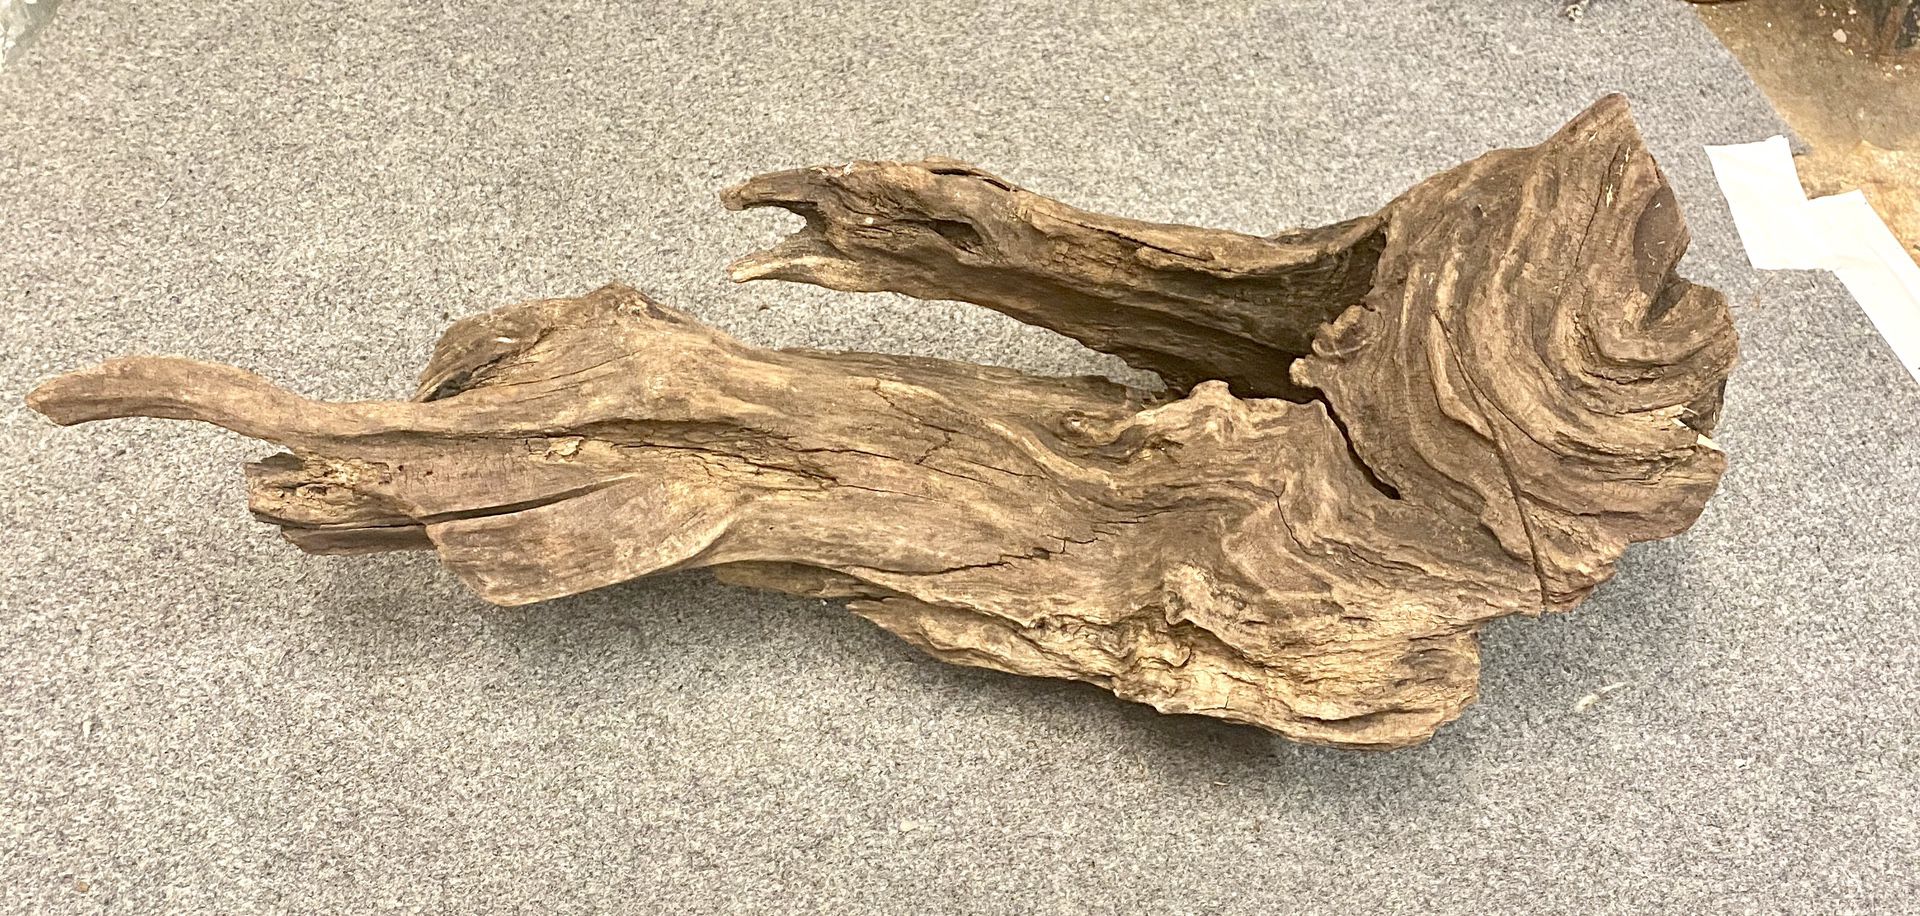 26 inch piece of driftwood